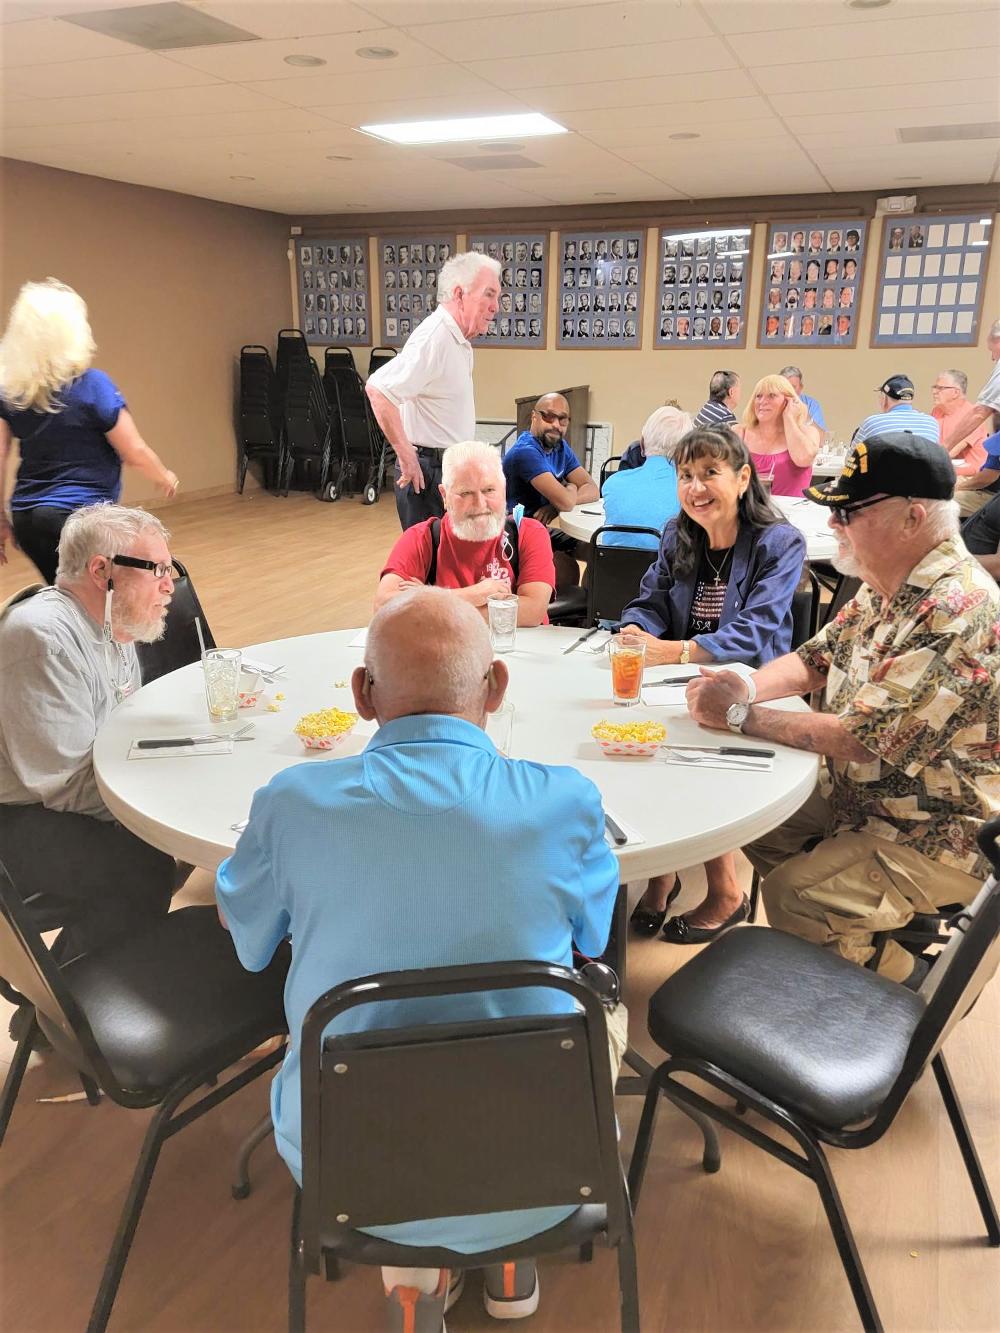 On May 25th, 2022, the Tucson AZ Elks Lodge #385 had 17 veterans arrive from the Tucson VA Blind Rehab Center for an amazing dinner of Country Fried Steak, mash potatoes, chocolate cake brownies for dessert. 

In photo at table and standing are members M. Megerle, W. Thompson and L. Ruiz